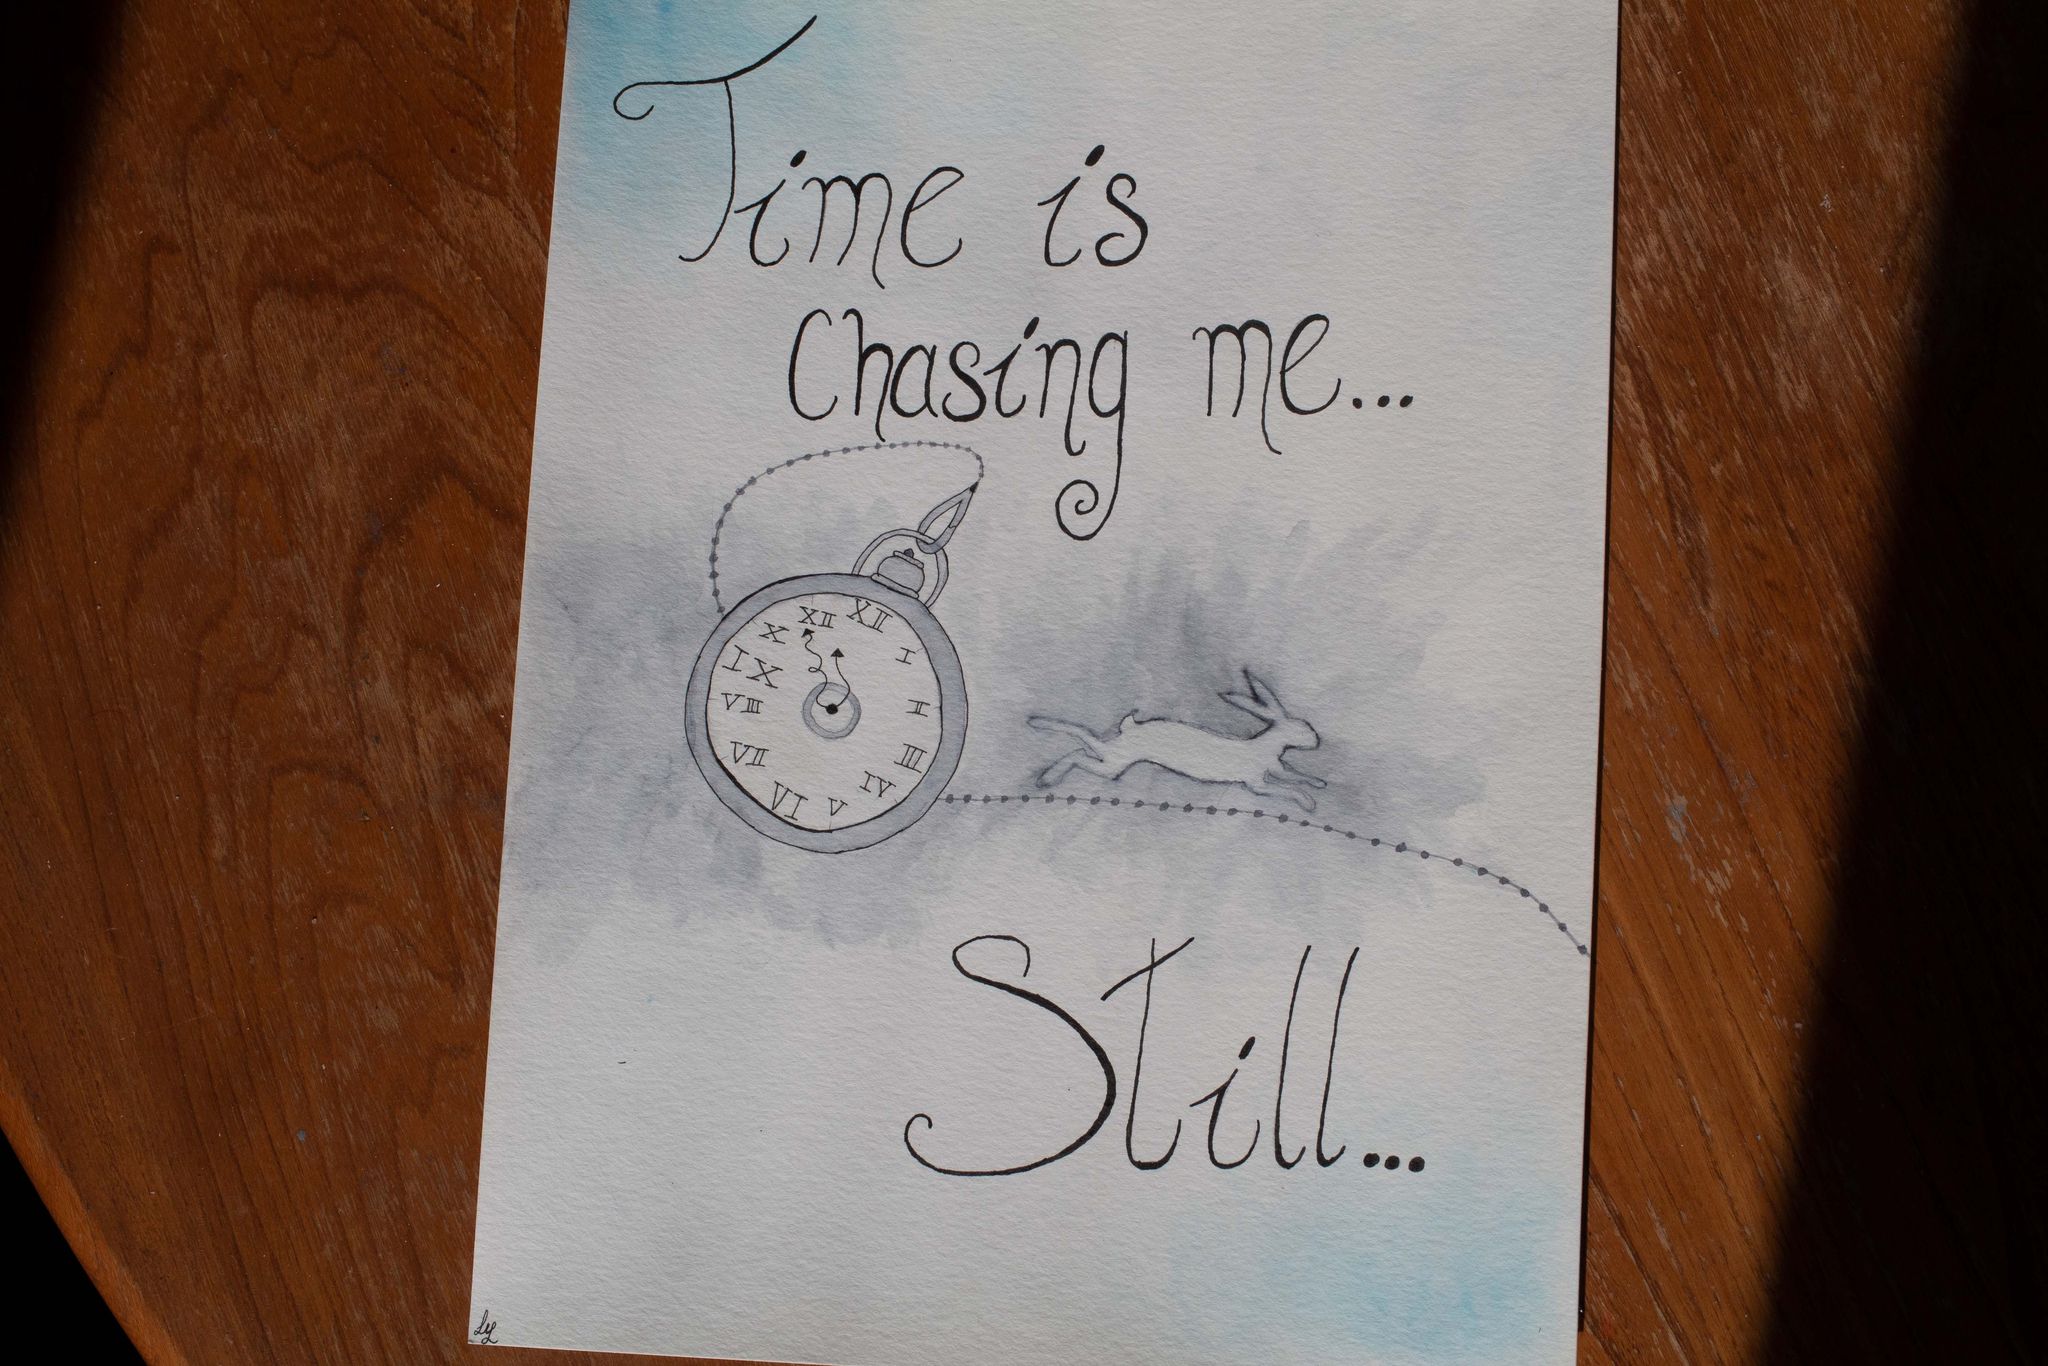 Product image of blue and white watercolour painting with white rabbit, pocket watch and text "Time is chasing me... Still"